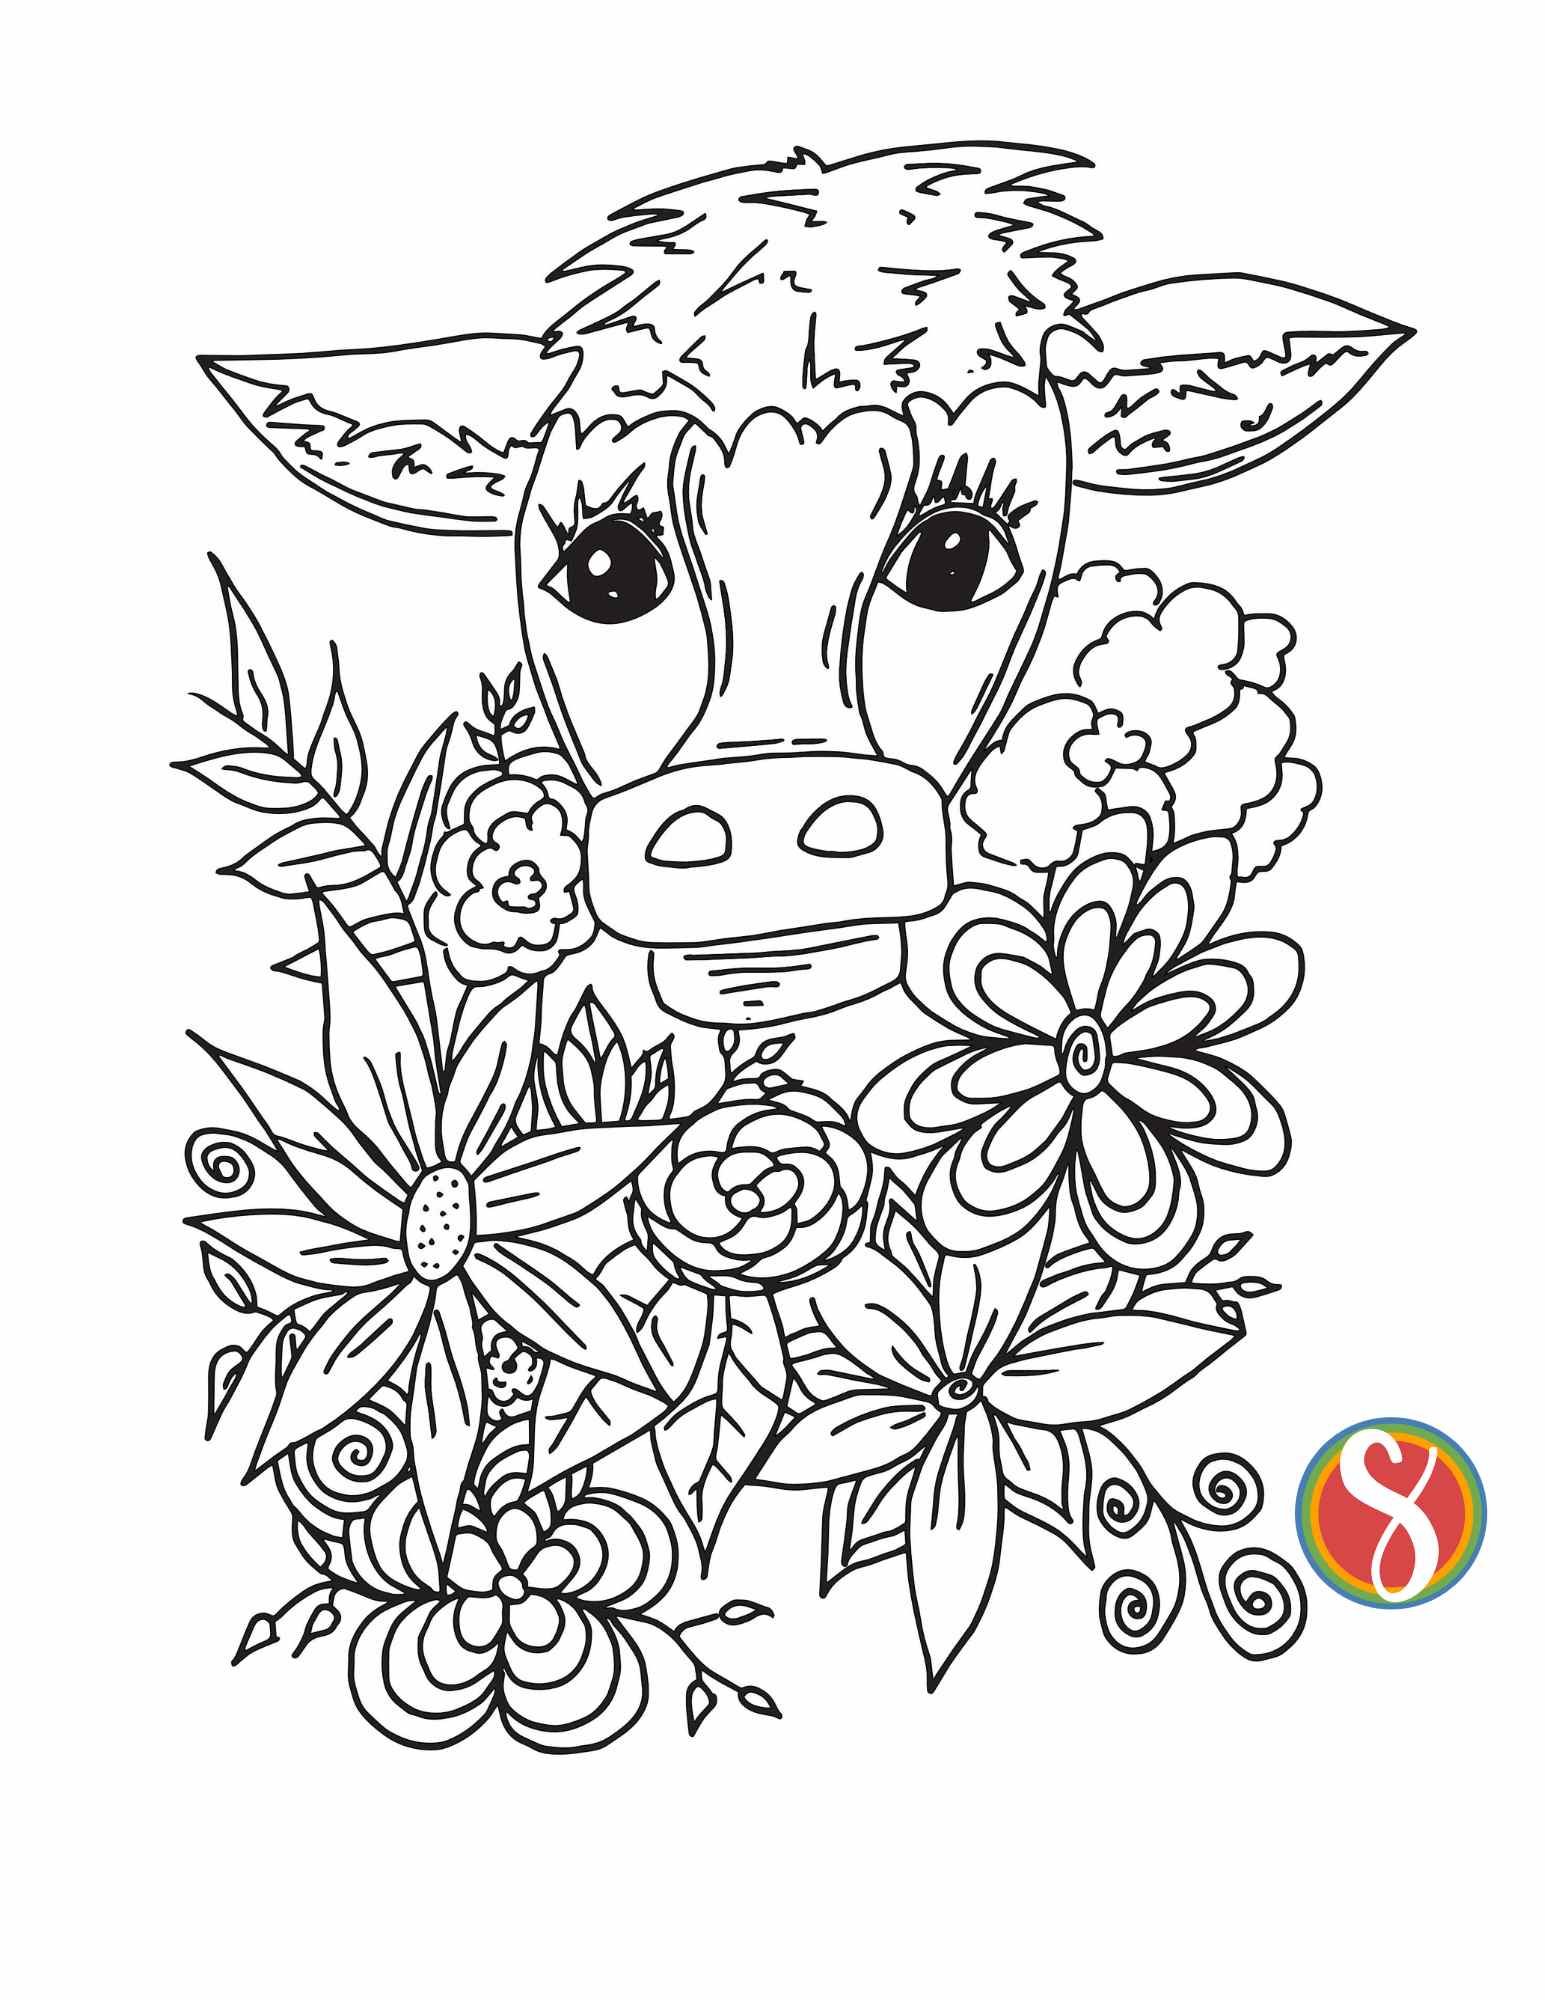 A pretty cow head with pointy ears and big eyes, a black and white outline surrounded by simple flowers, all images colorable